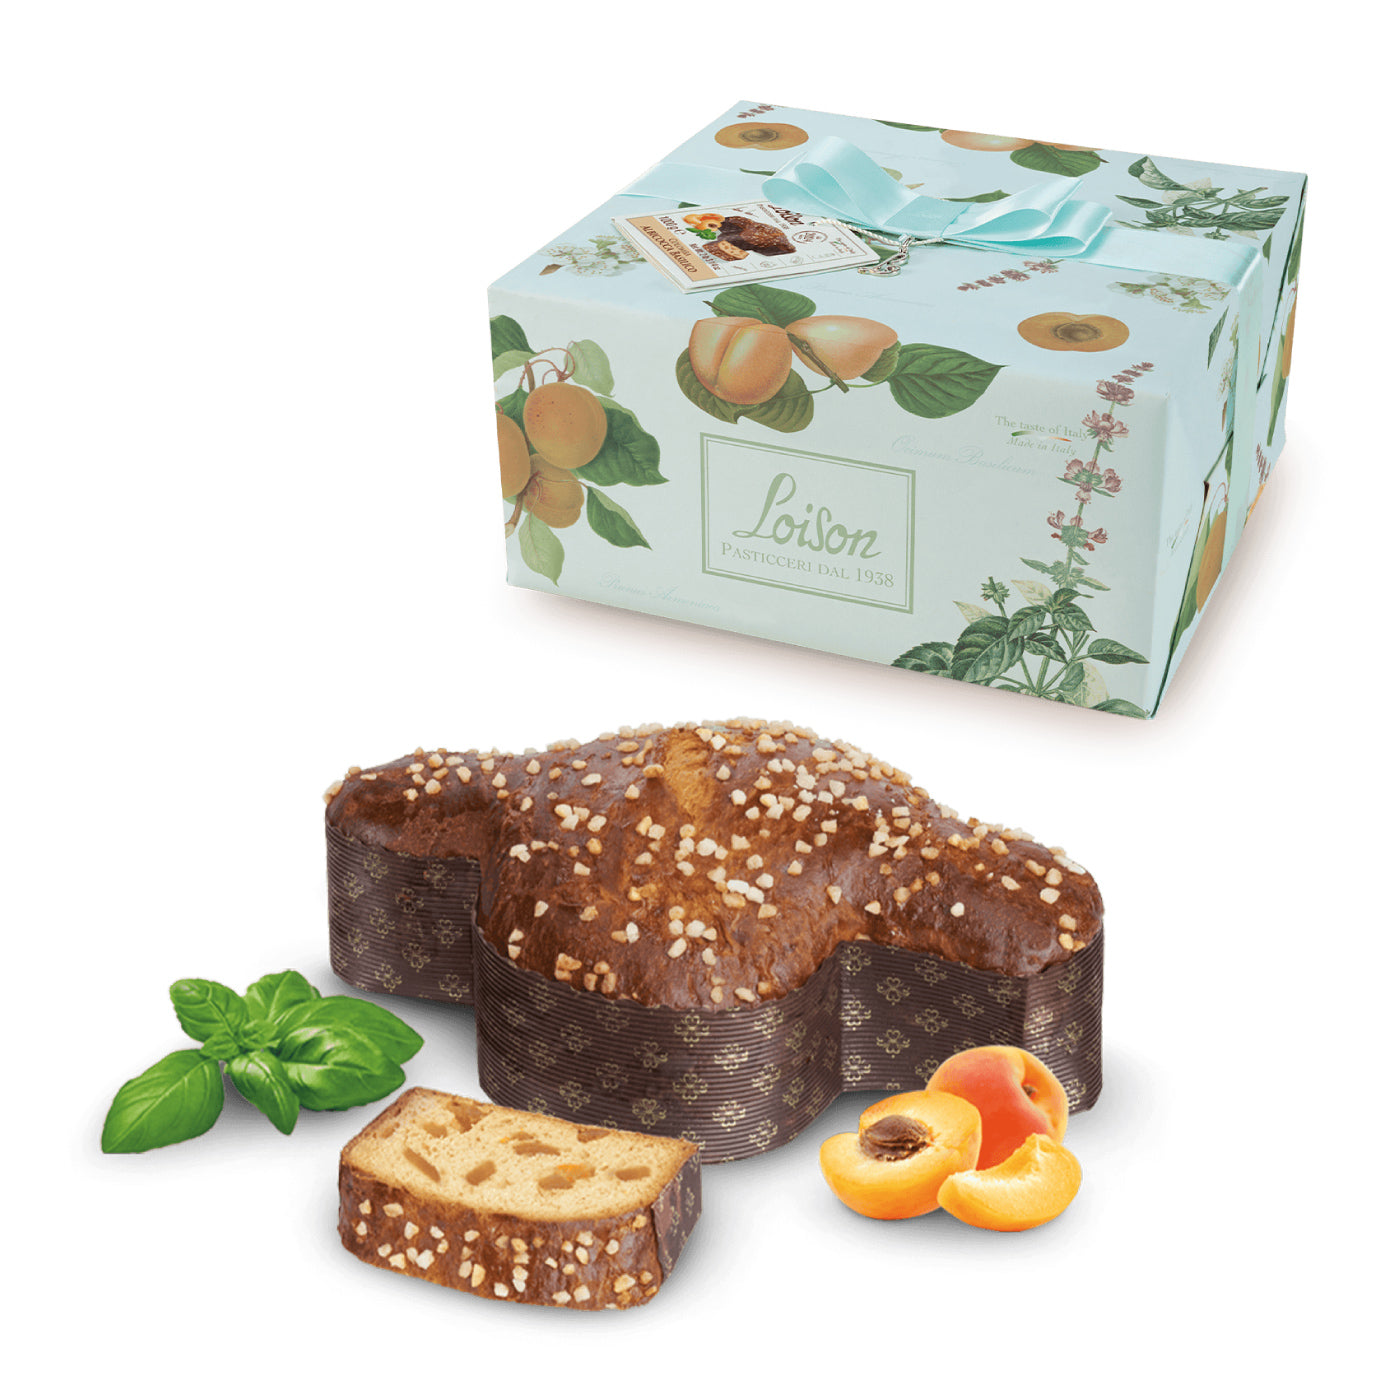 Colomba Apricot and Basil Loison